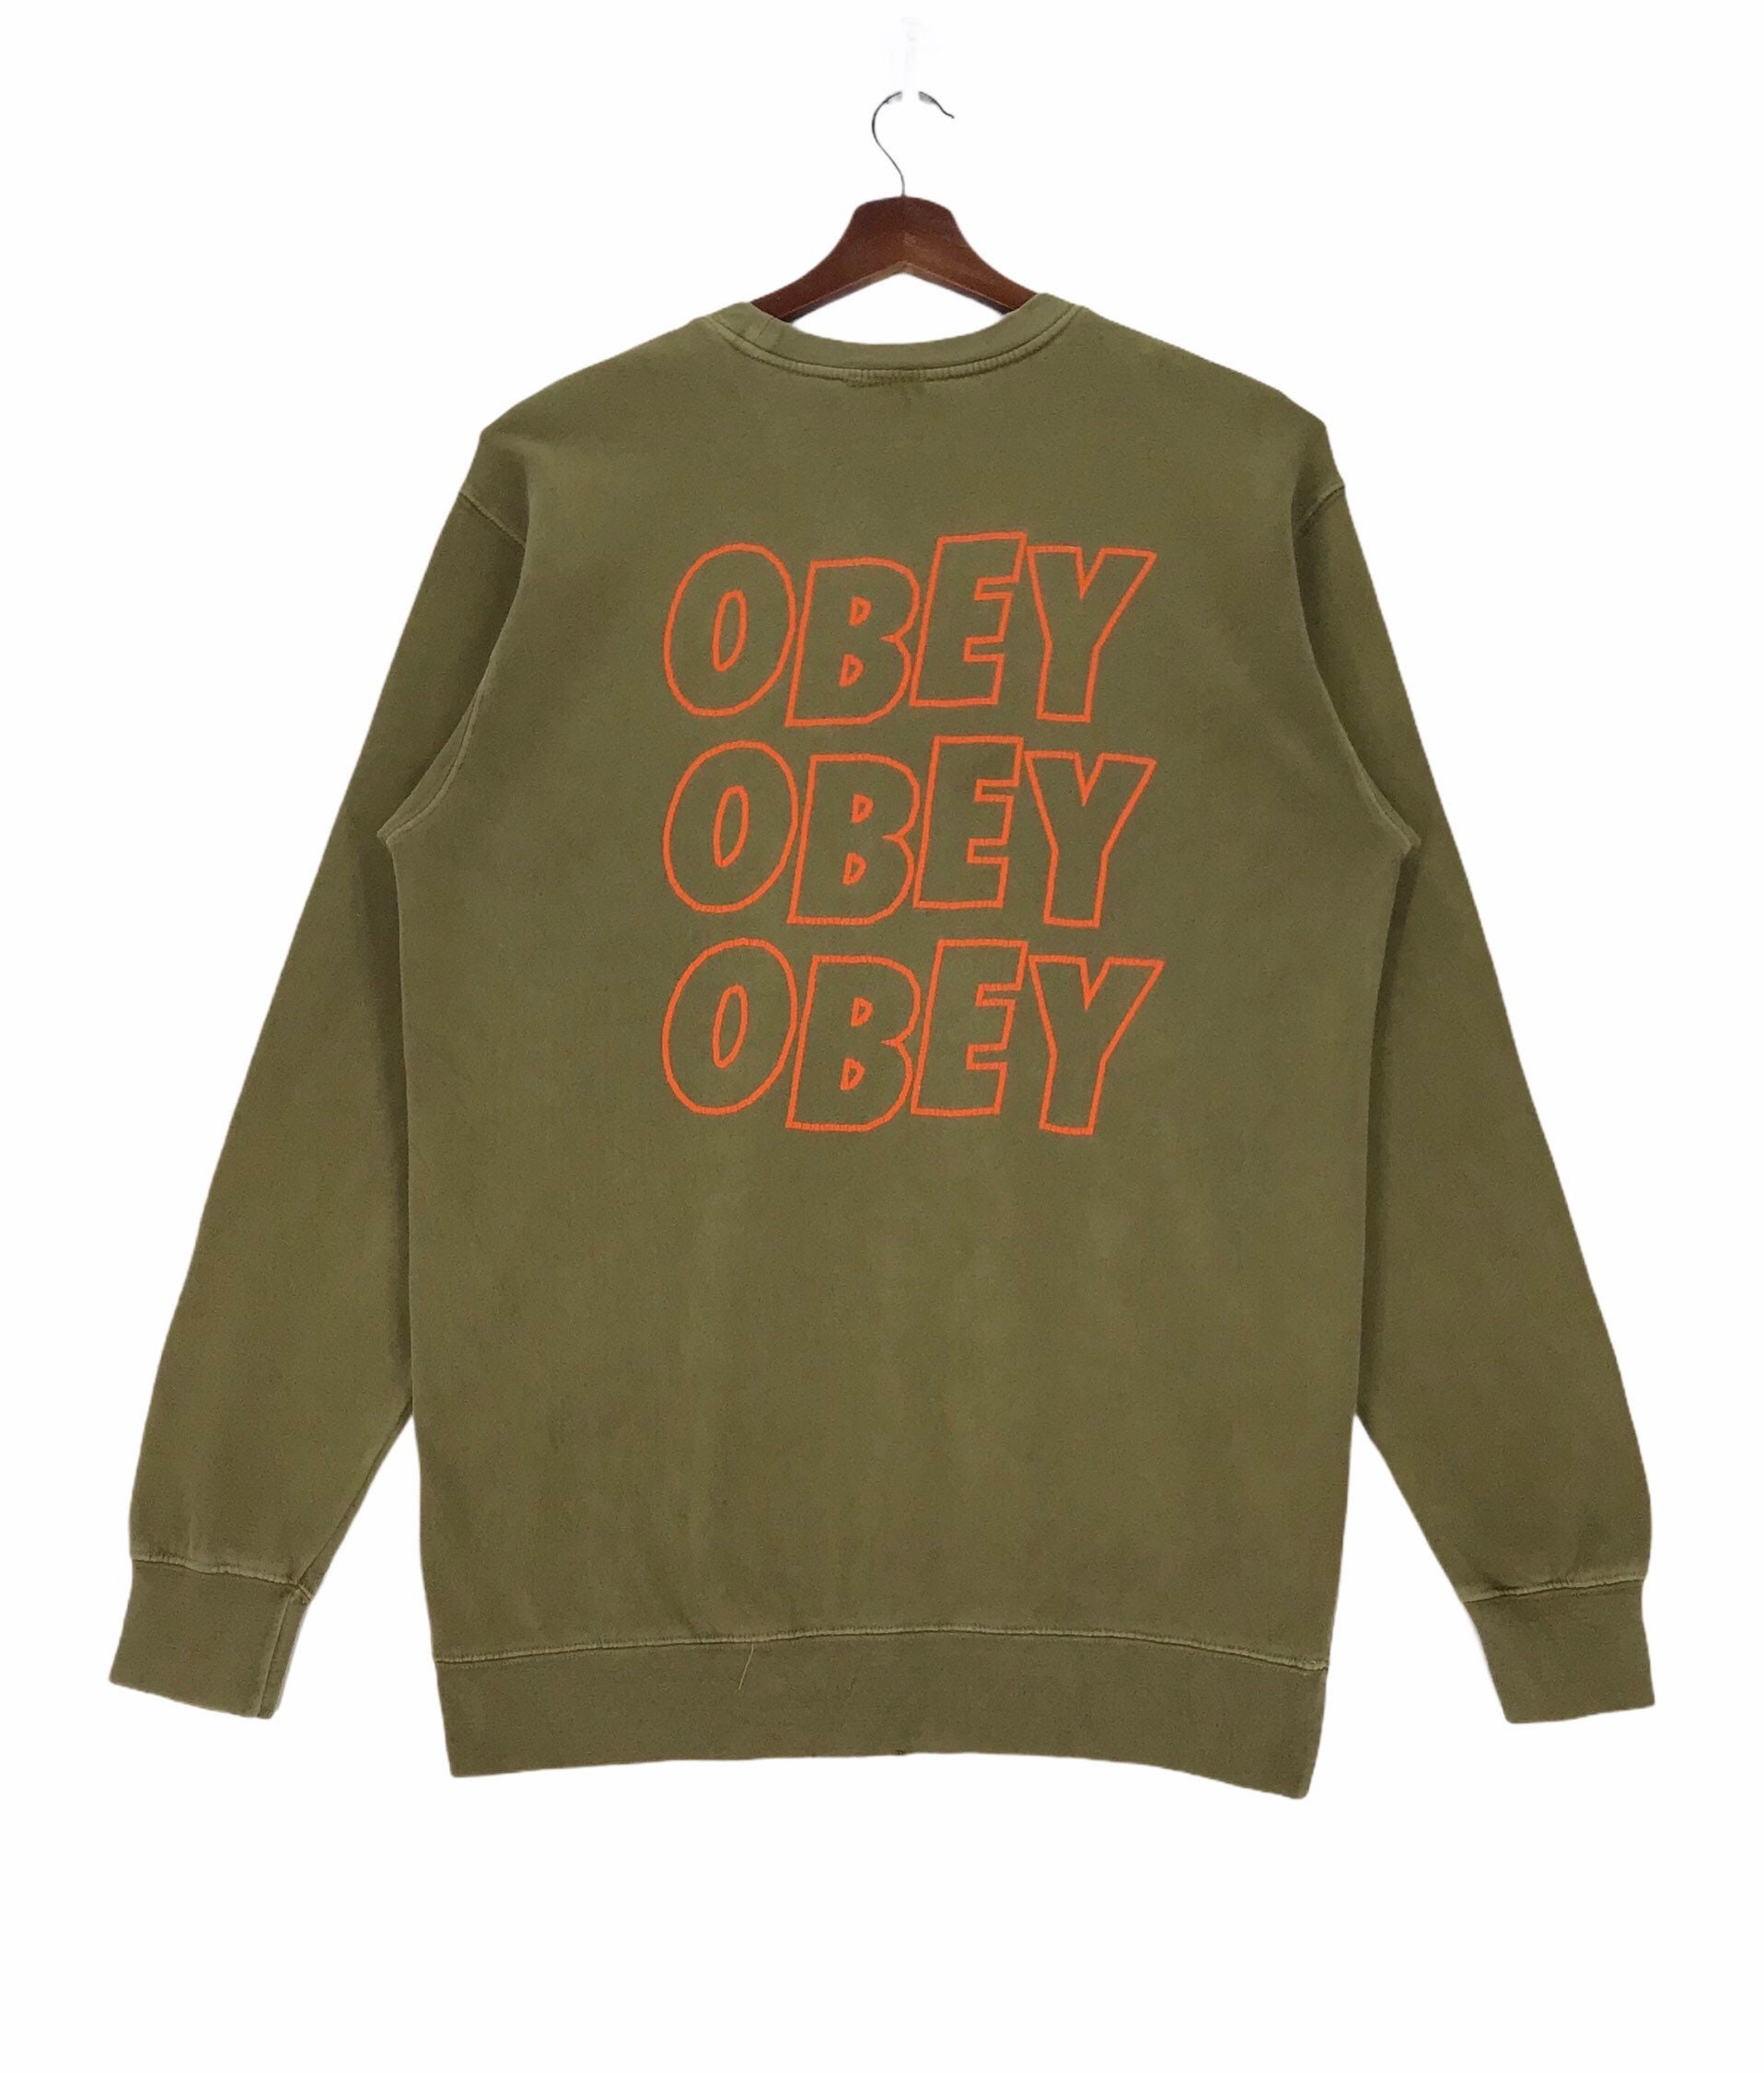 Vintage Obey Clothing Company Sweatshirt Spellout - Etsy 日本